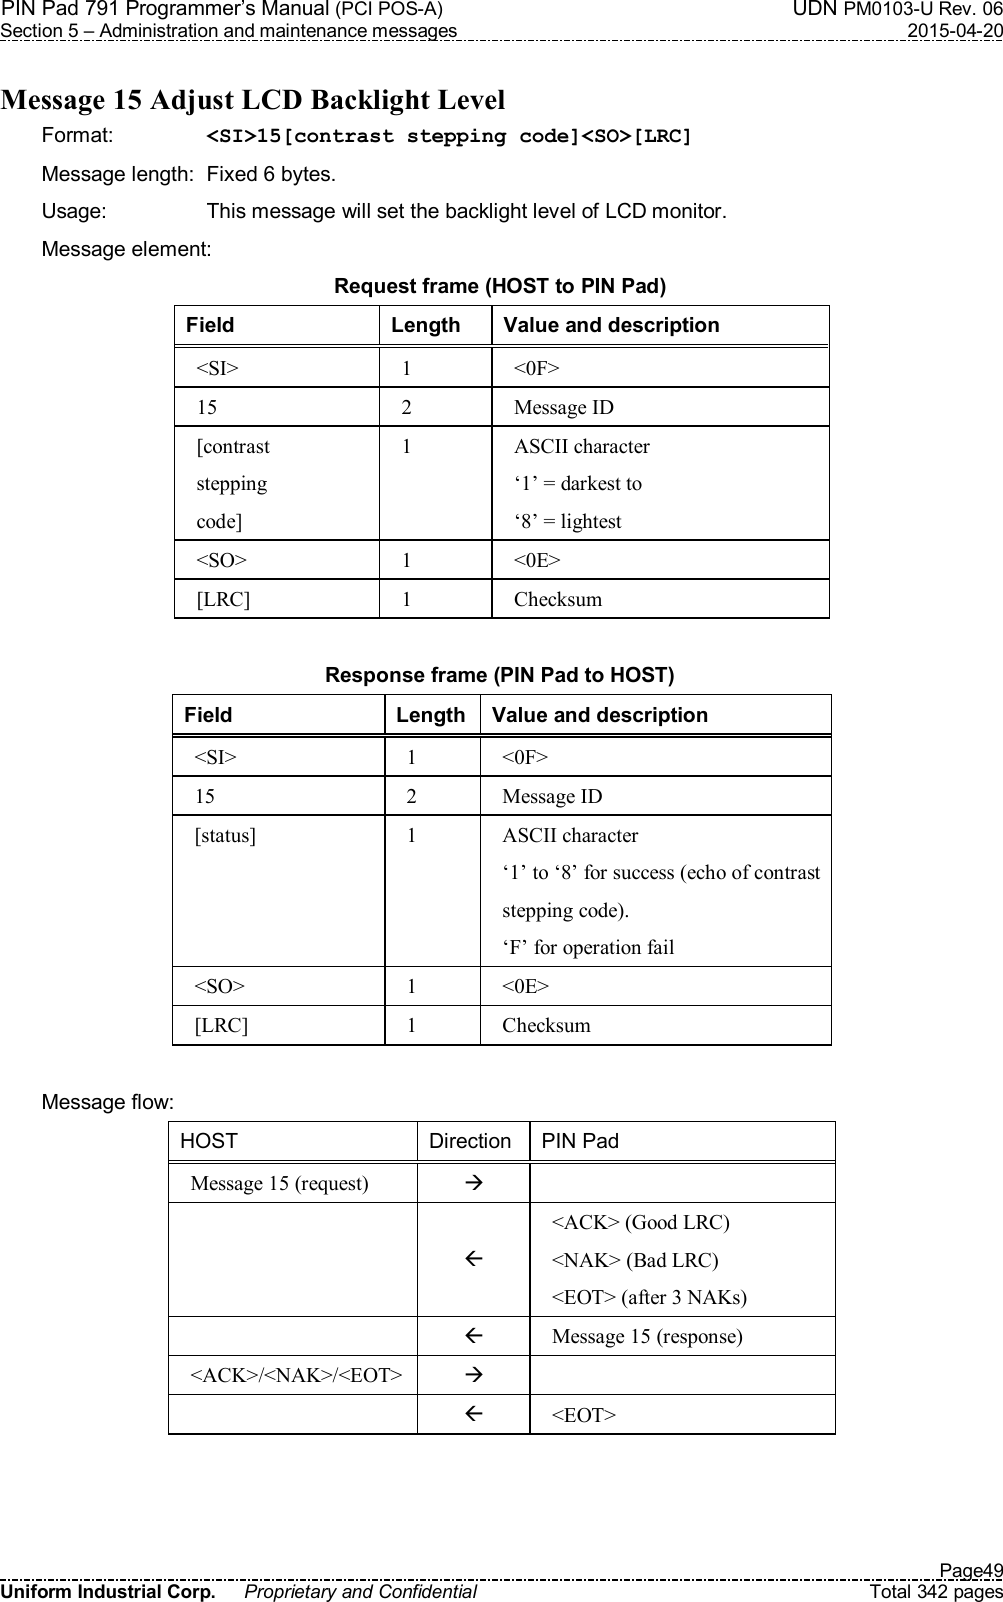 PIN Pad 791 Programmer’s Manual (PCI POS-A)  UDN PM0103-U Rev. 06 Section 5 – Administration and maintenance messages  2015-04-20   Page49 Uniform Industrial Corp.  Proprietary and Confidential  Total 342 pages  Message 15 Adjust LCD Backlight Level Format:    &lt;SI&gt;15[contrast stepping code]&lt;SO&gt;[LRC] Message length:  Fixed 6 bytes. Usage:  This message will set the backlight level of LCD monitor. Message element: Request frame (HOST to PIN Pad) Field  Length  Value and description &lt;SI&gt;  1  &lt;0F&gt; 15  2  Message ID [contrast   stepping   code] 1  ASCII character ‘1’ = darkest to   ‘8’ = lightest &lt;SO&gt;  1  &lt;0E&gt; [LRC]  1  Checksum  Response frame (PIN Pad to HOST) Field  Length Value and description &lt;SI&gt;  1  &lt;0F&gt; 15  2  Message ID [status]  1  ASCII character ‘1’ to ‘8’ for success (echo of contrast stepping code). ‘F’ for operation fail &lt;SO&gt;  1  &lt;0E&gt; [LRC]  1  Checksum  Message flow: HOST  Direction  PIN Pad Message 15 (request)      &lt;ACK&gt; (Good LRC) &lt;NAK&gt; (Bad LRC) &lt;EOT&gt; (after 3 NAKs)   Message 15 (response) &lt;ACK&gt;/&lt;NAK&gt;/&lt;EOT&gt;     &lt;EOT&gt;  